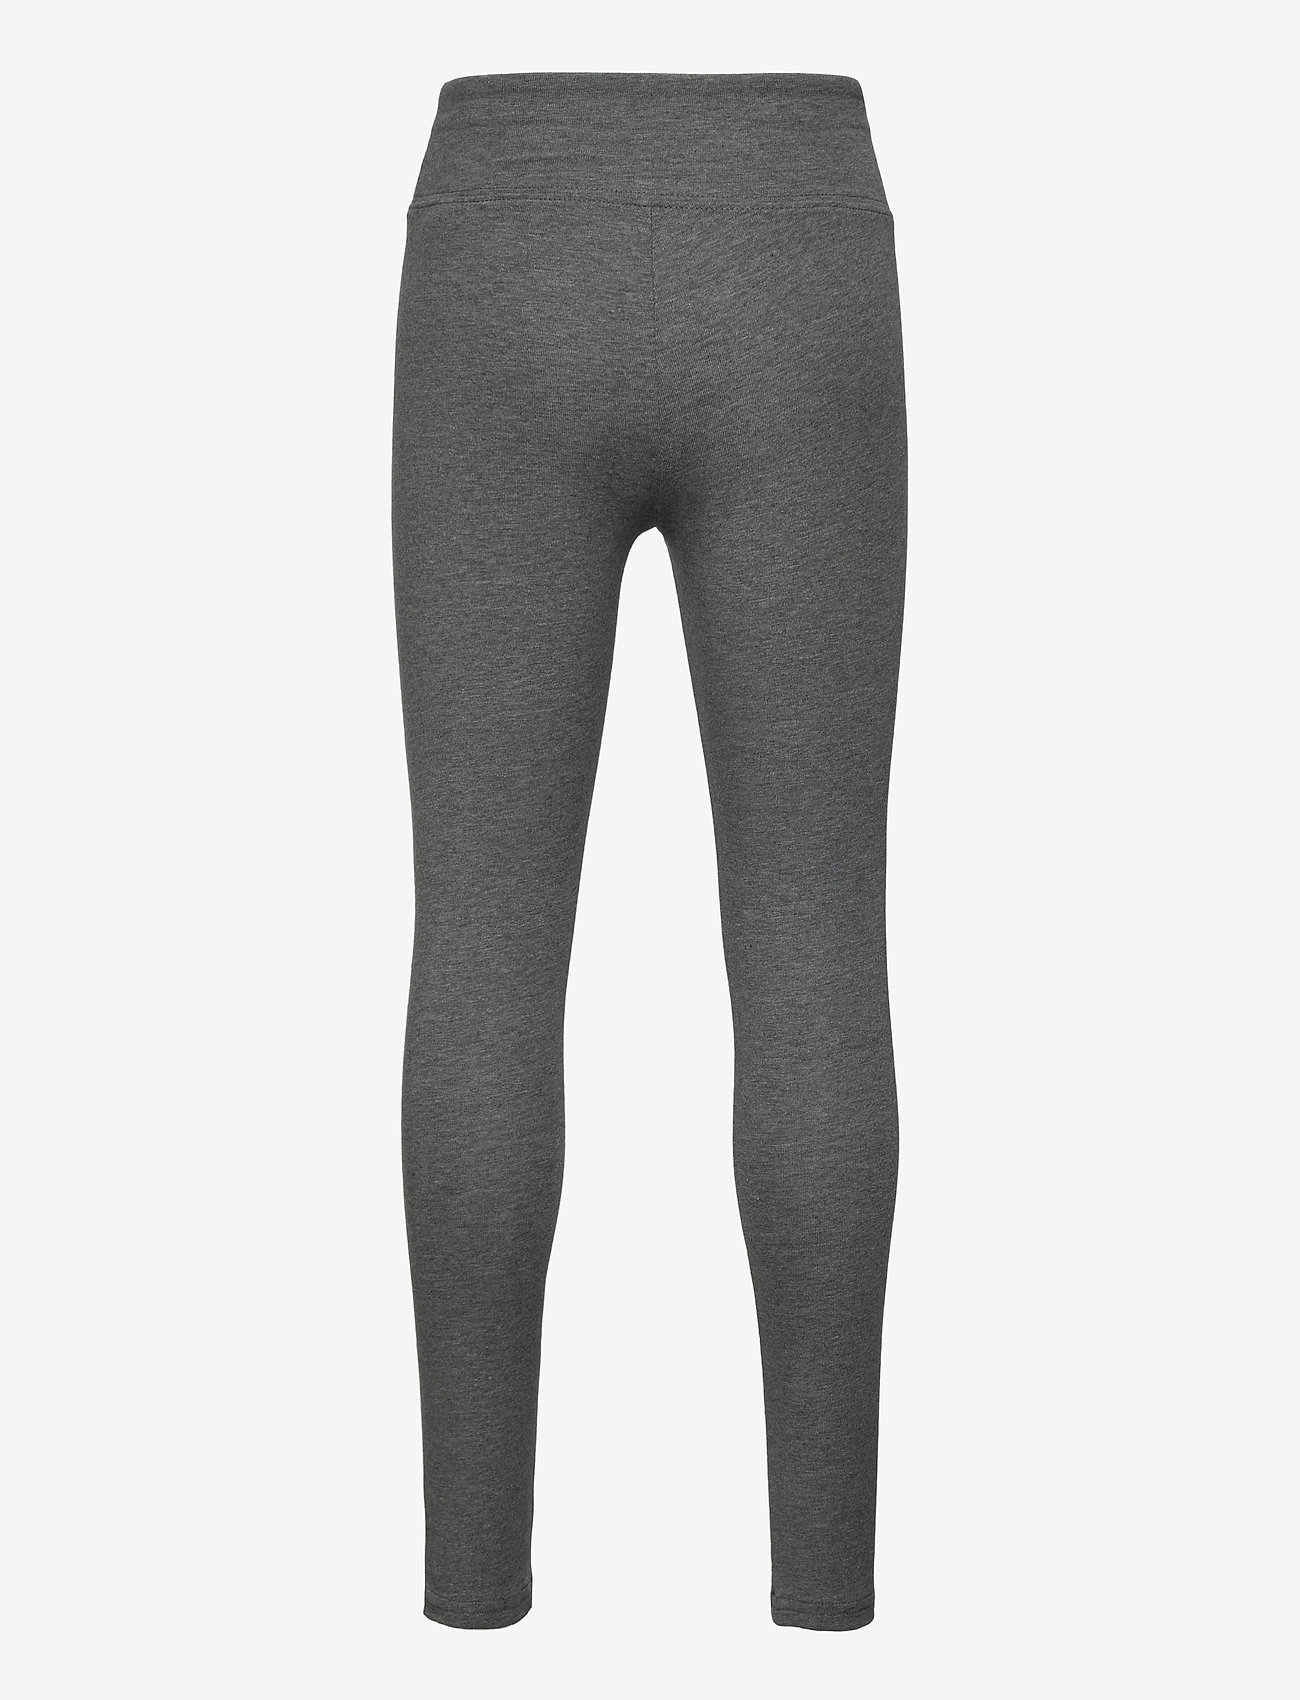 abercrombie and fitch leggings